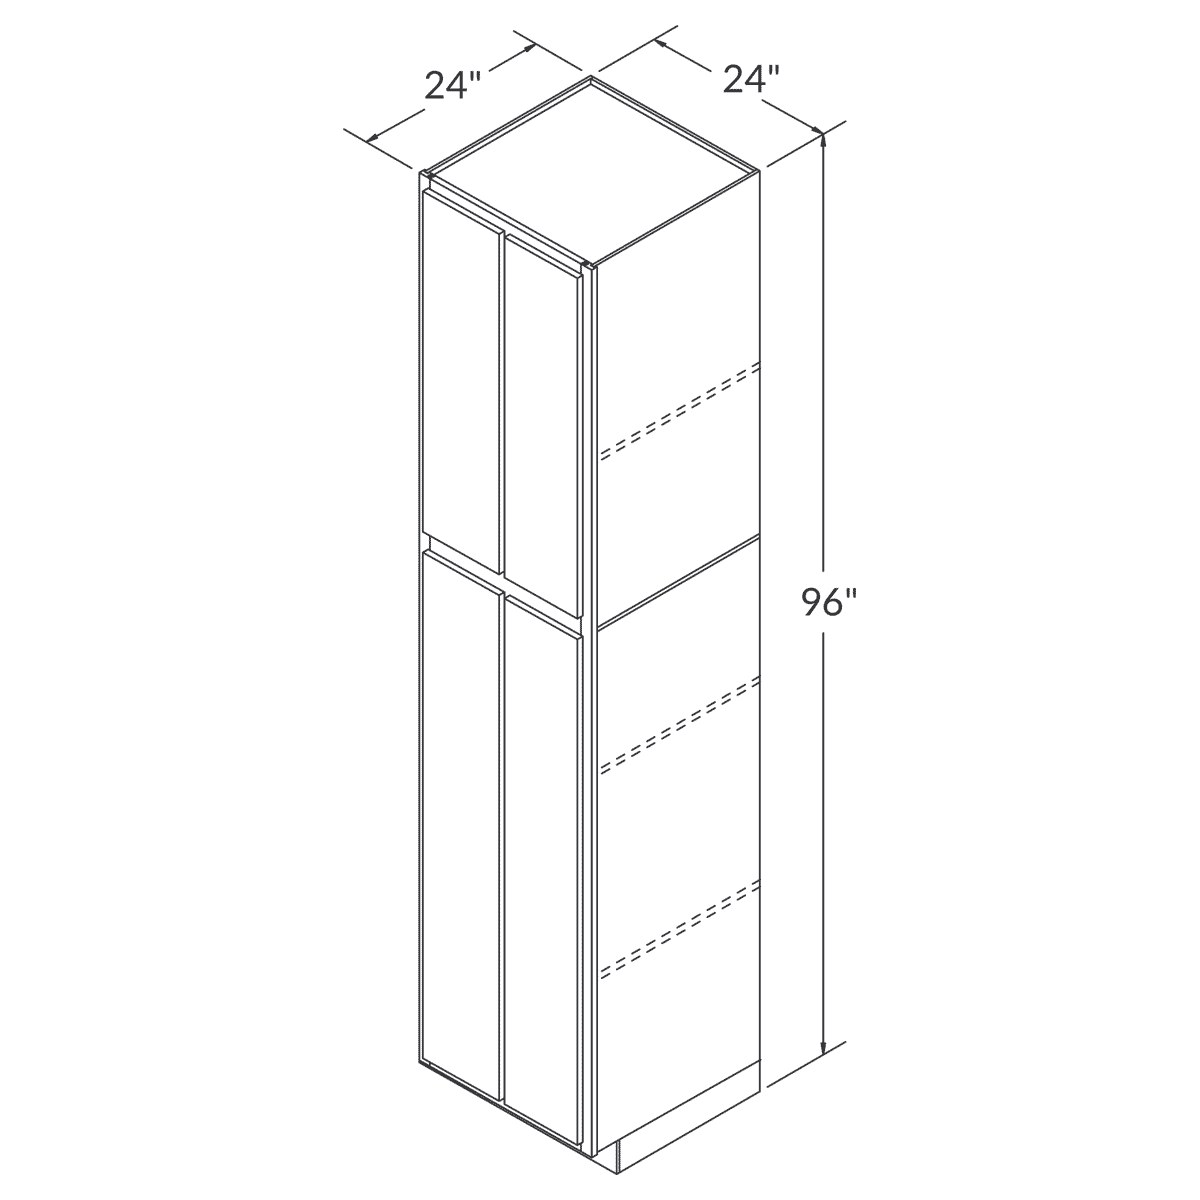 Cubitac Imperial Bergen Latte Tall Pantry 24"W x 96"H Assembled Cabinet Wireframe